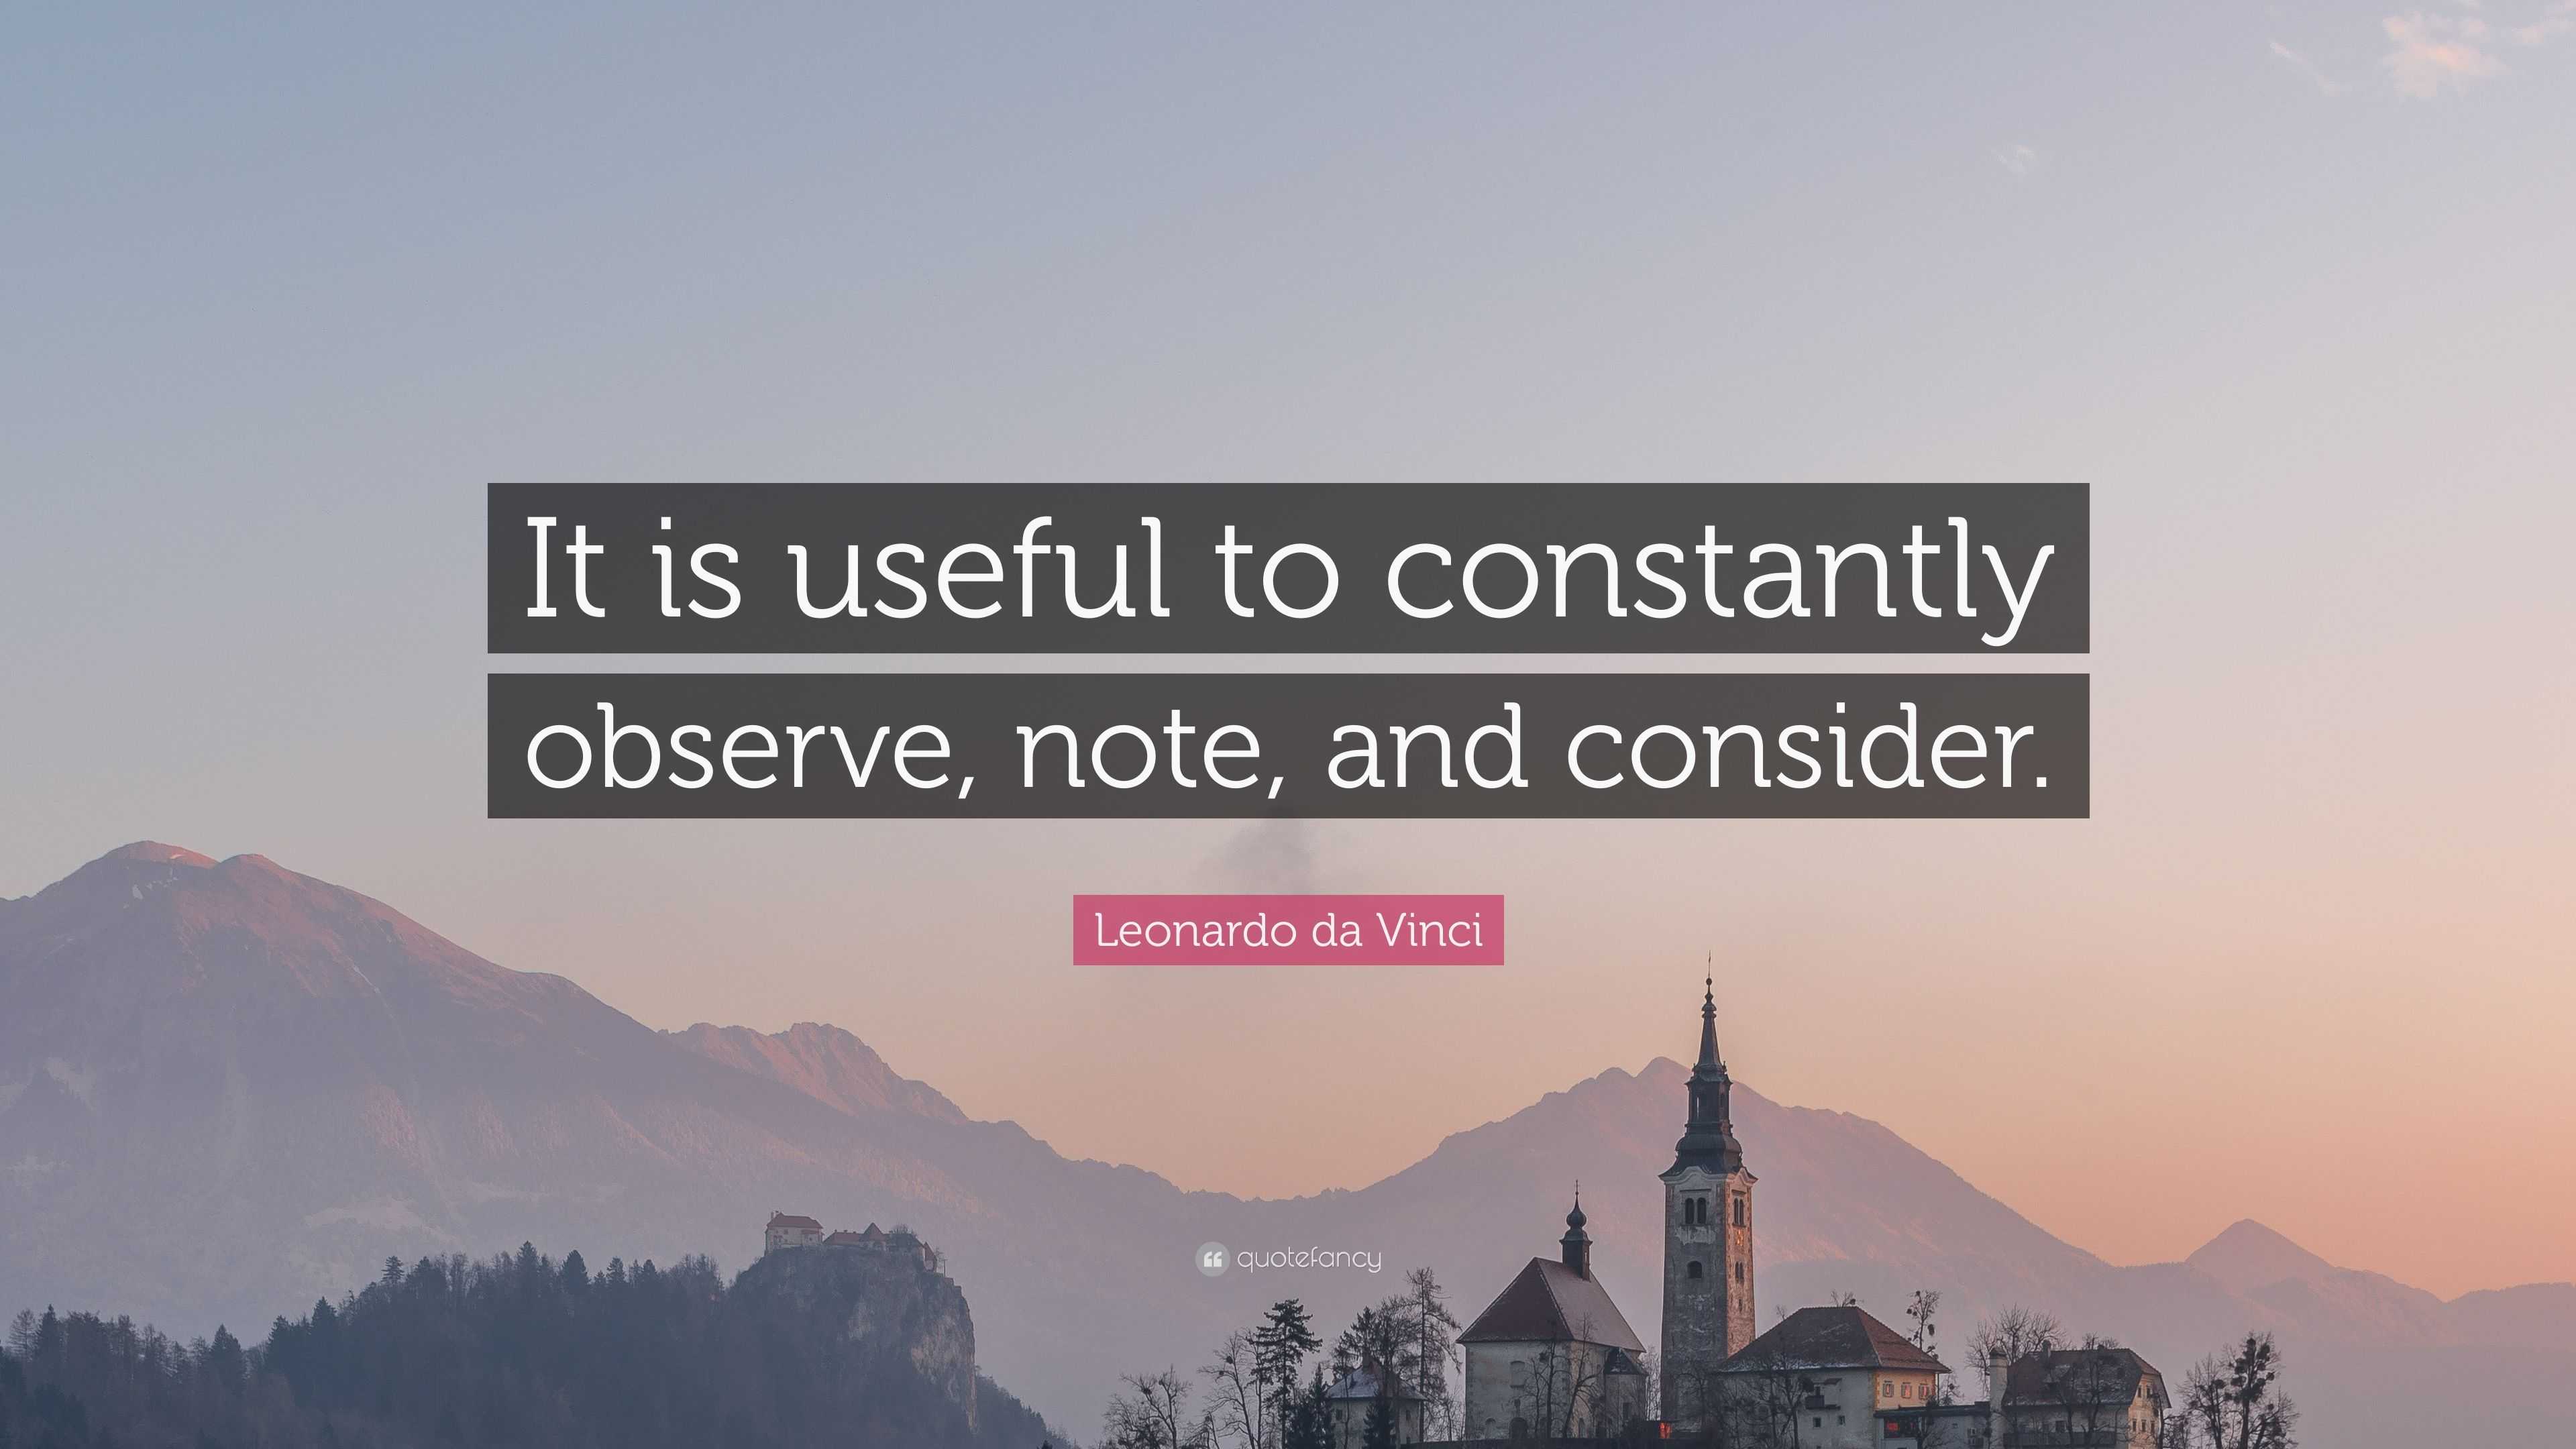 Leonardo da Vinci Quote: “It is useful to constantly observe, note, and ...